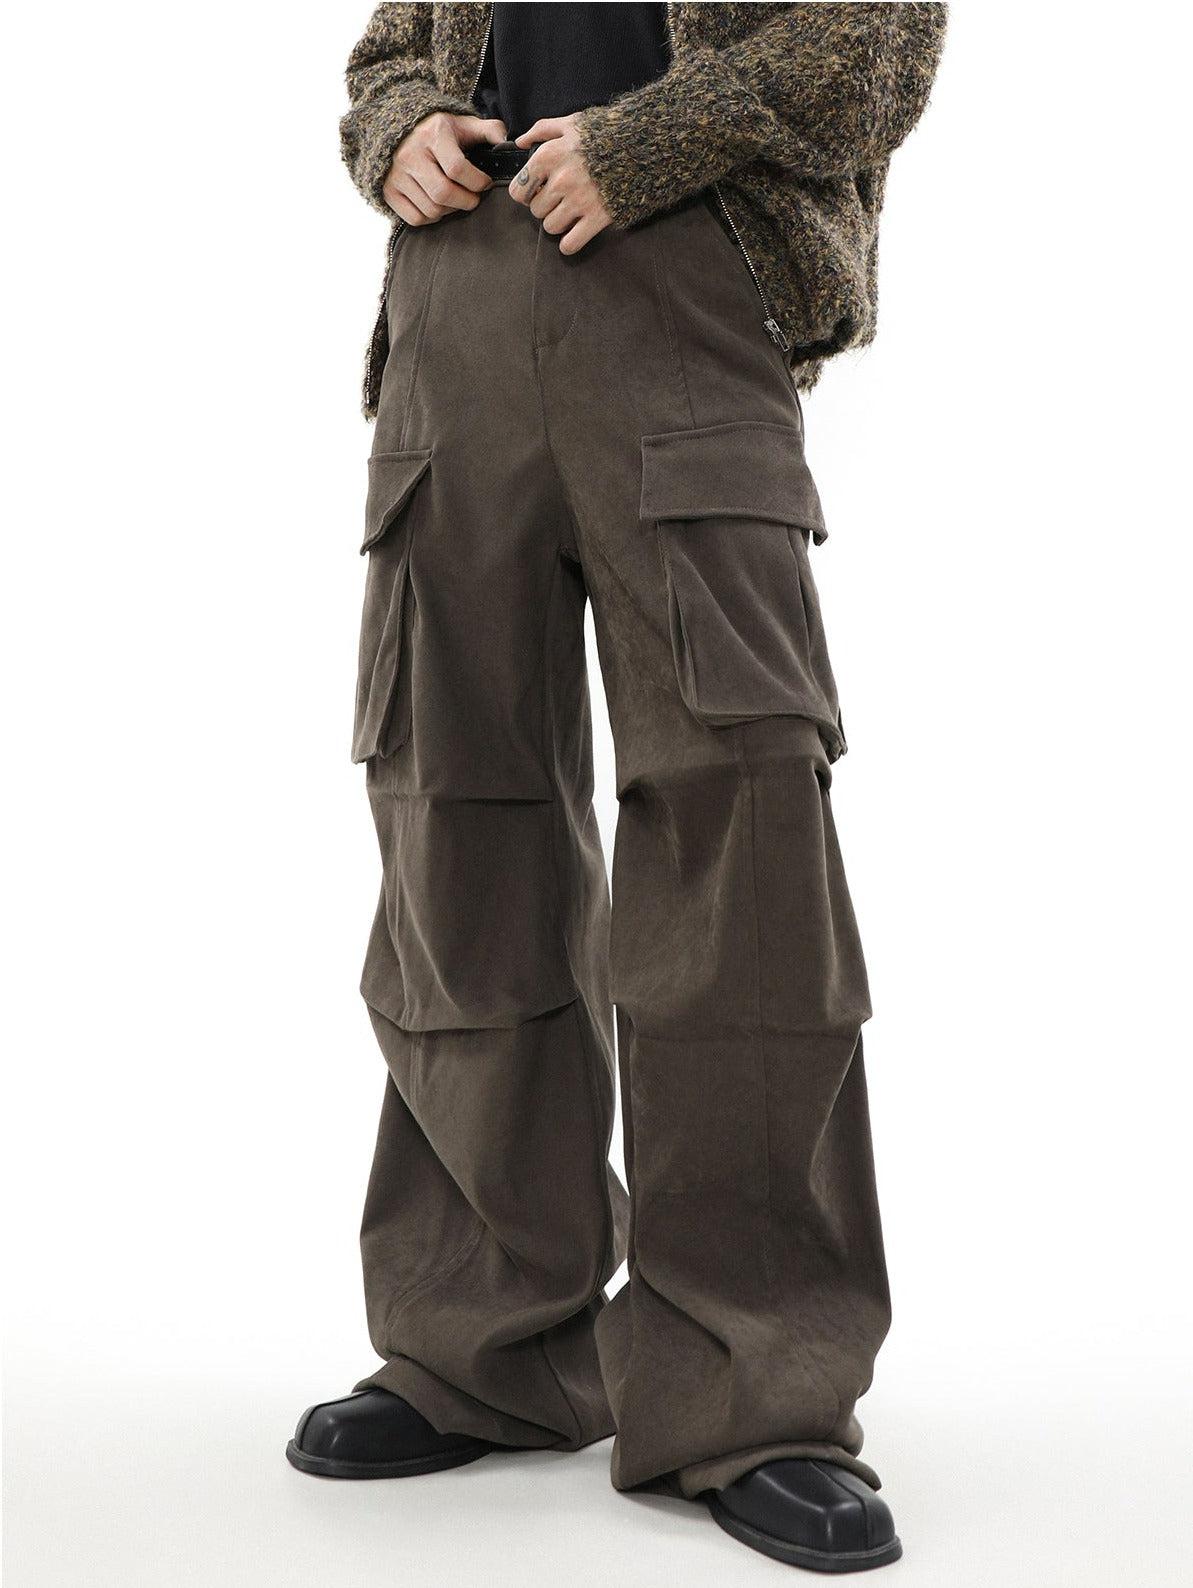 Knee Pleated Wide Cut Cargo Pants Korean Street Fashion Pants By Mr Nearly Shop Online at OH Vault